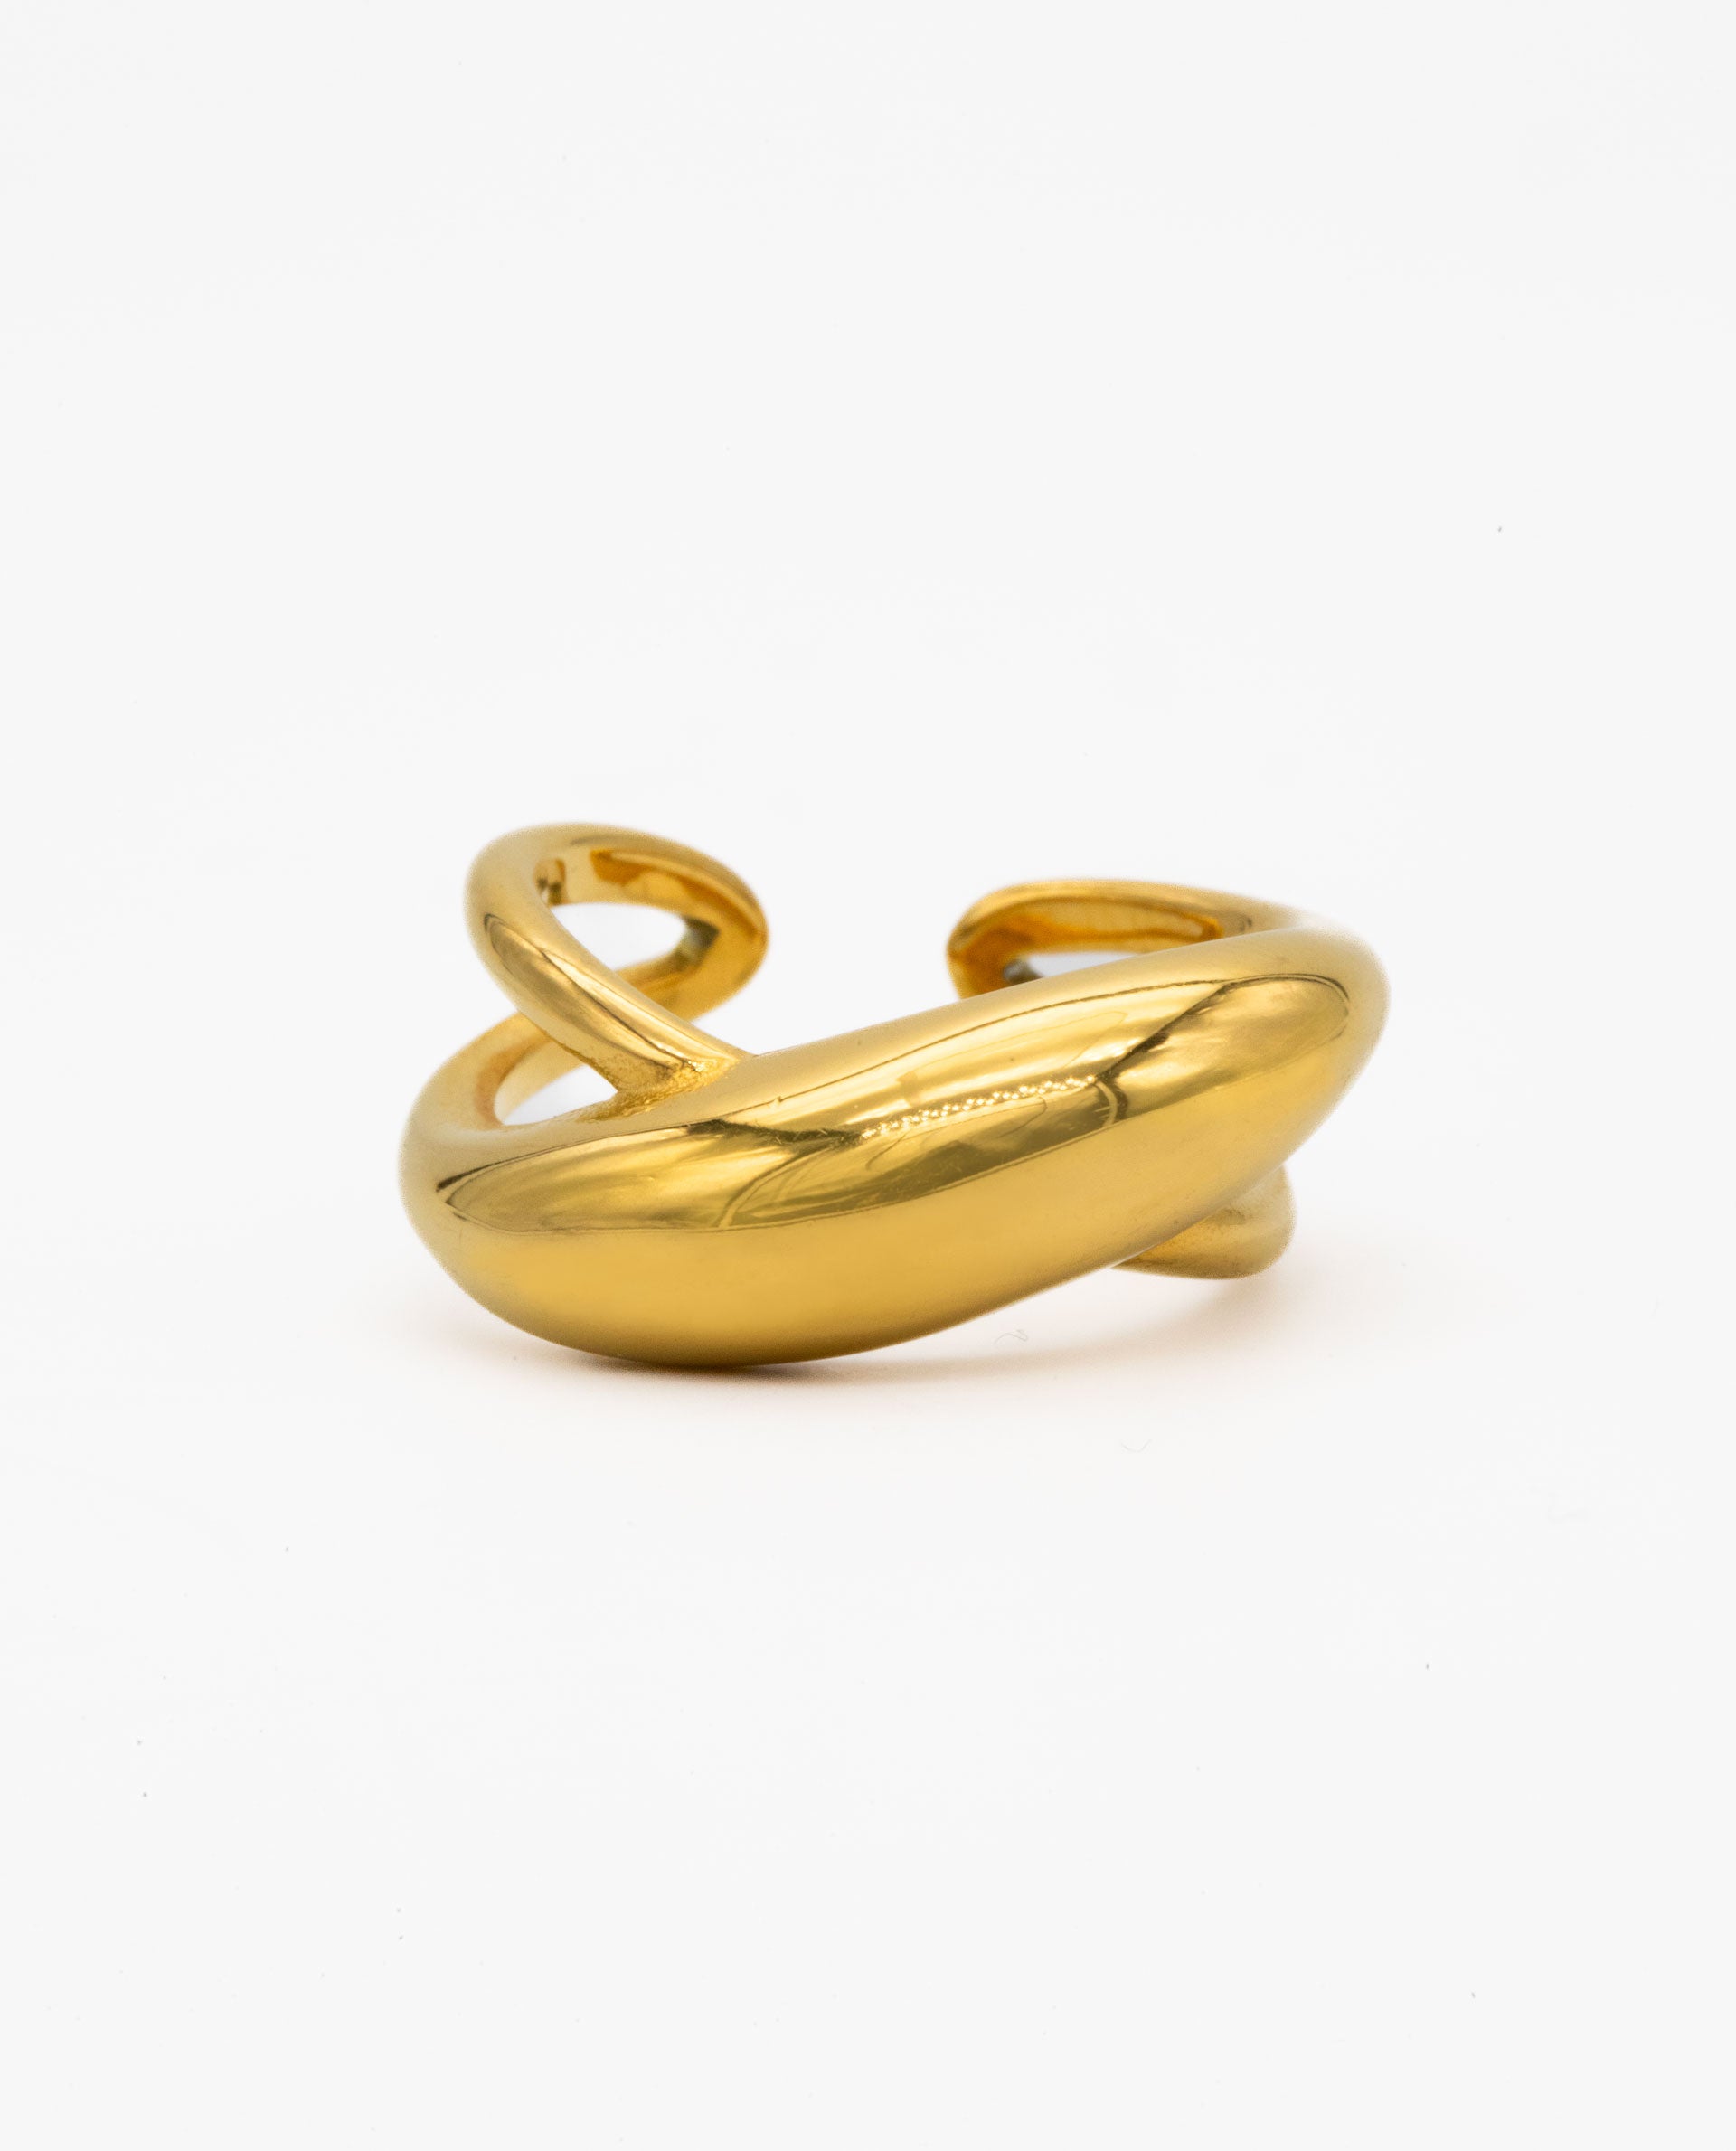 EX-RING - STEEL GOLD PLATED